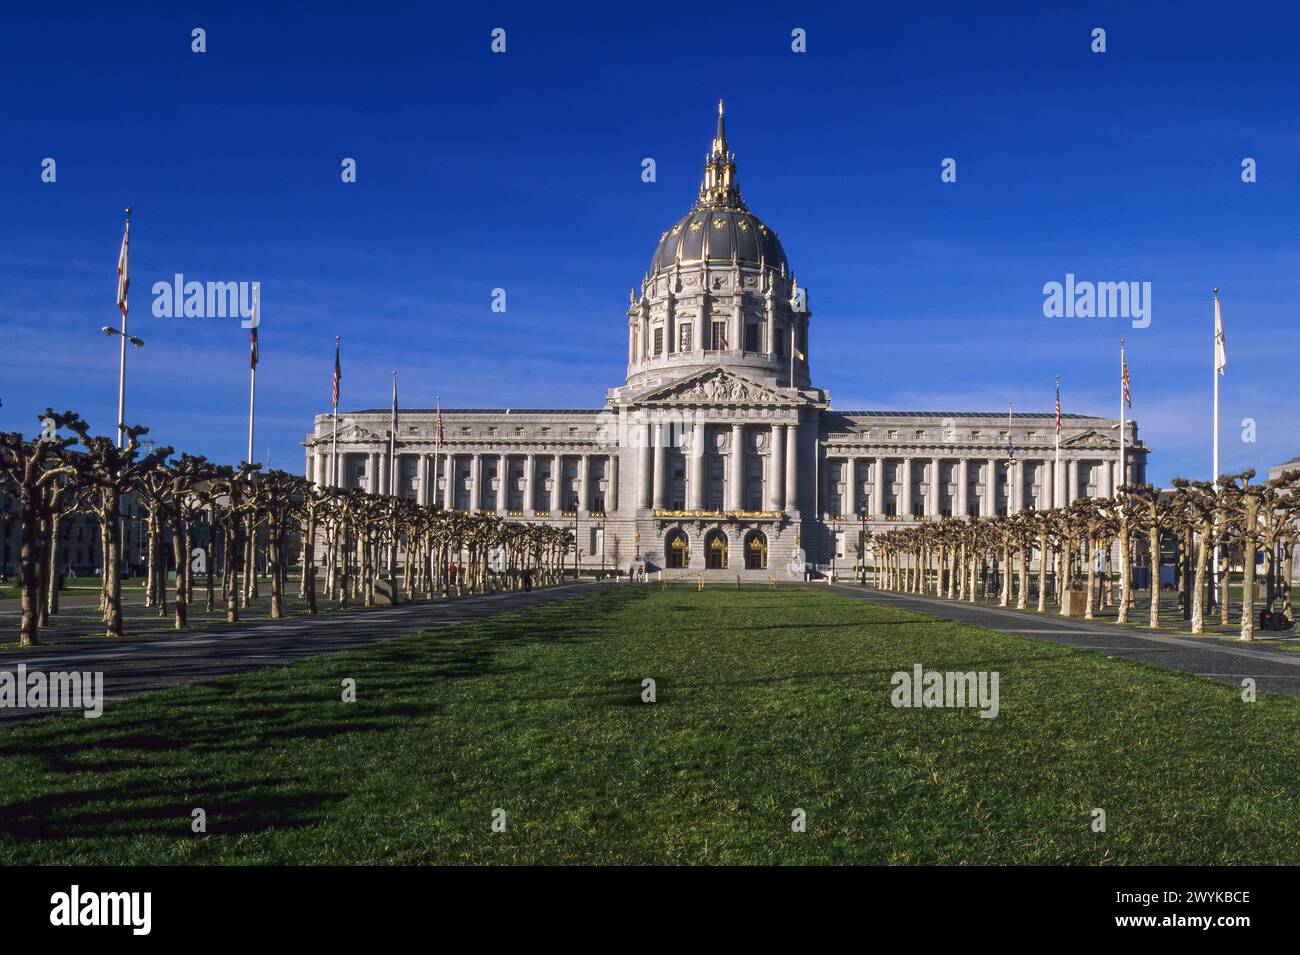 San Francisco, California - City Hall.  Built 1913-15, an example of French Renaissance Revival Architecture. Stock Photo